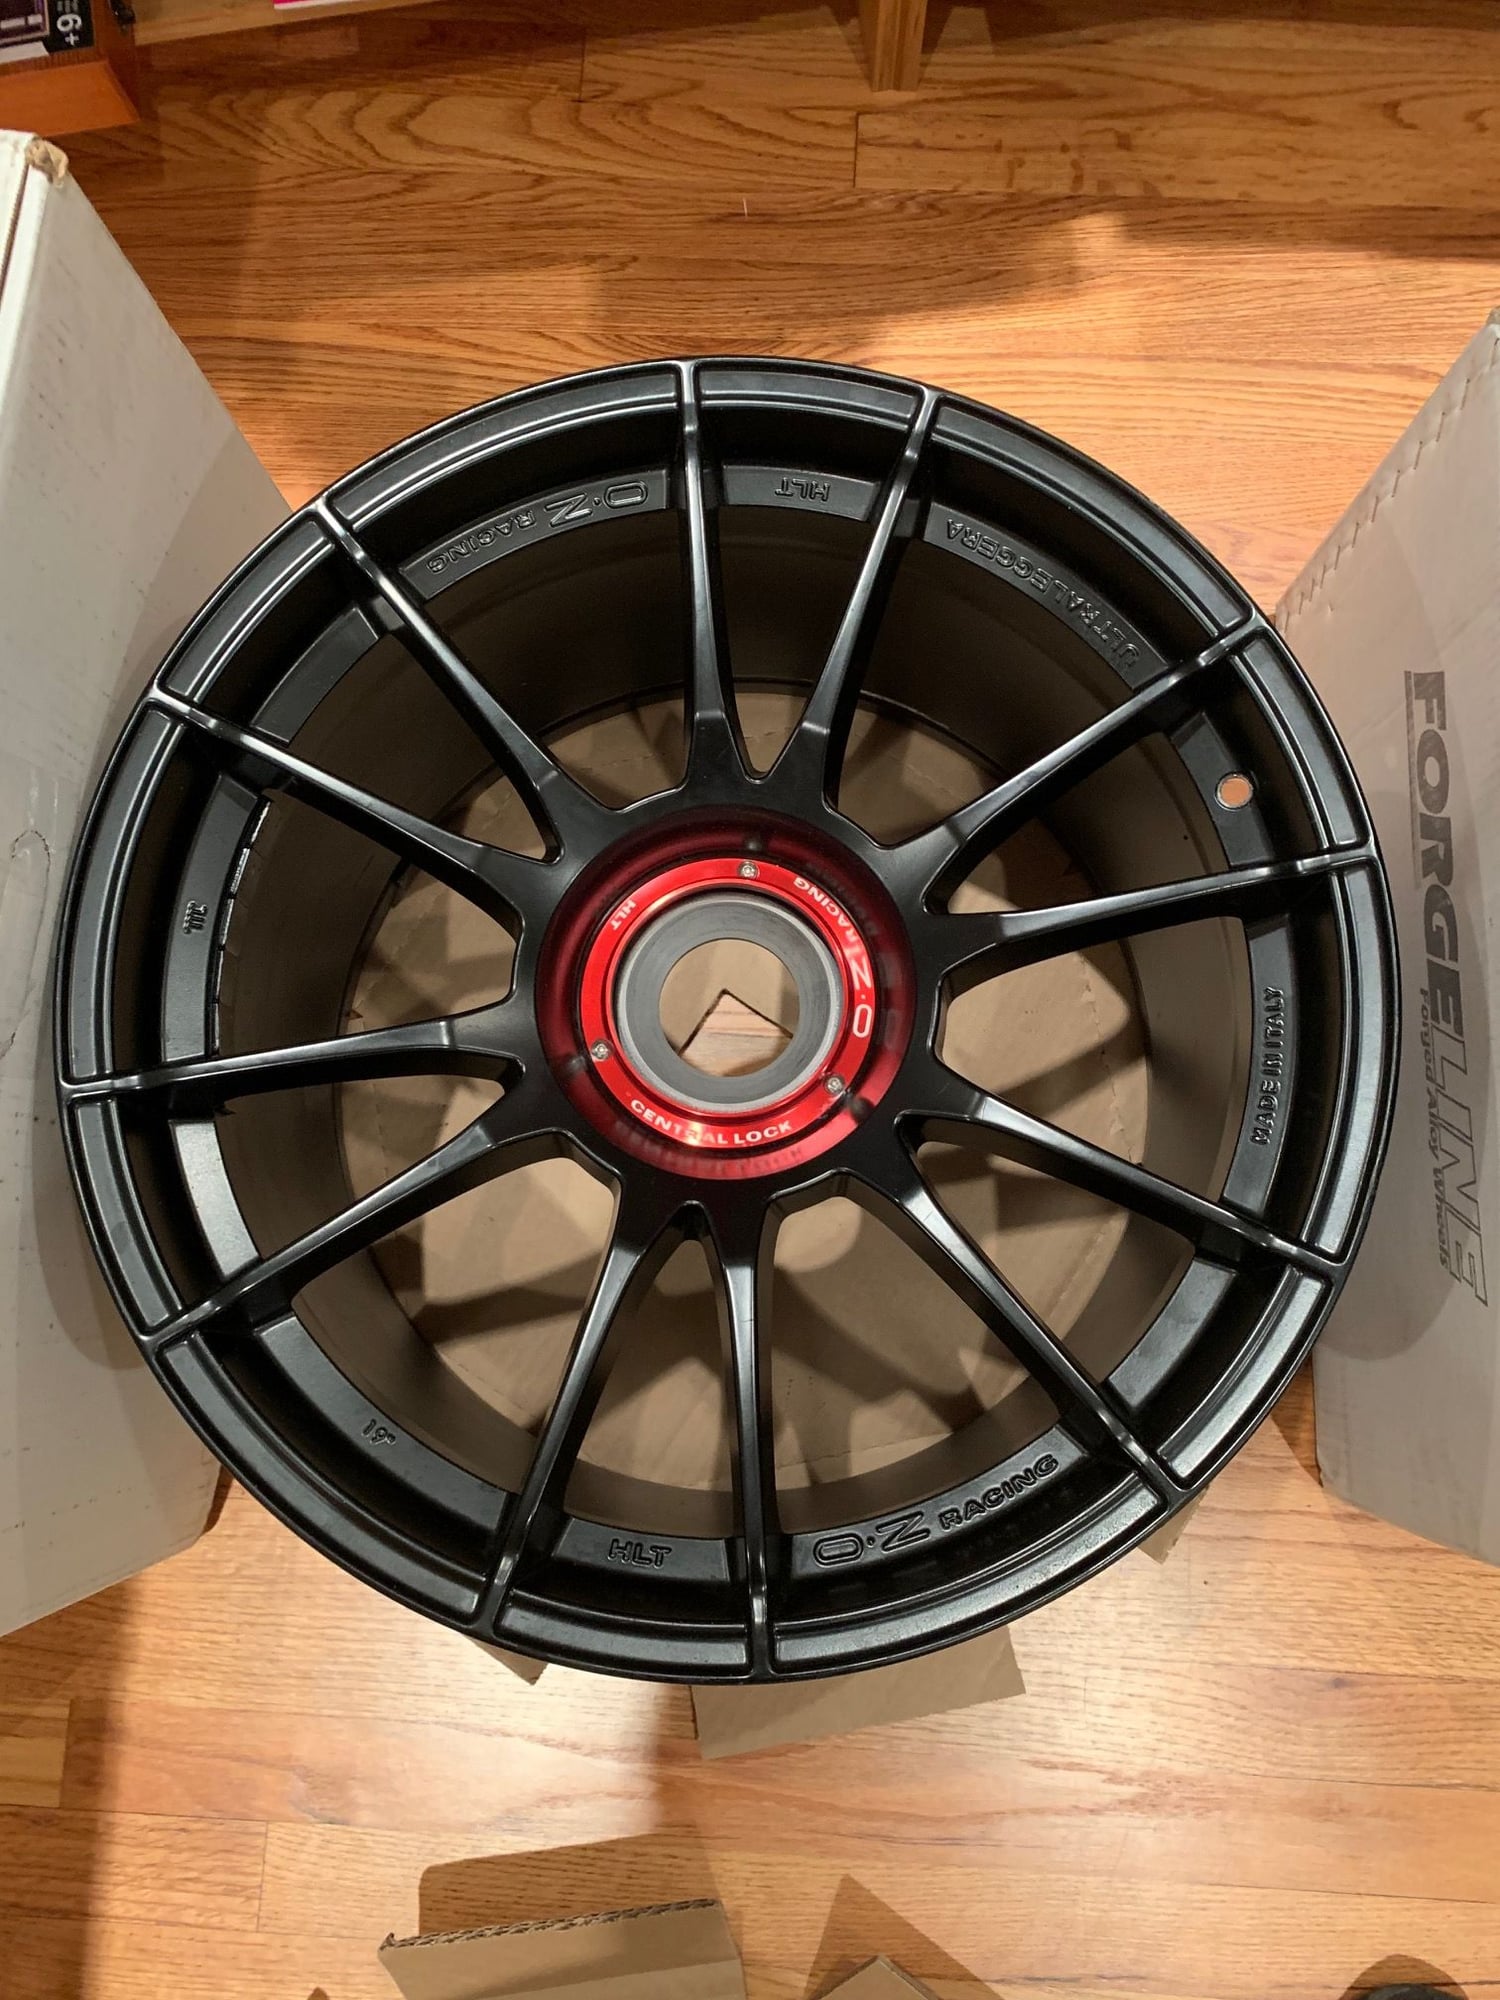 Wheels and Tires/Axles - OZ Centerlock Wheels for 997 GT3 19" - Used - 2010 to 2012 Porsche GT3 - Campbell, CA 95008, United States